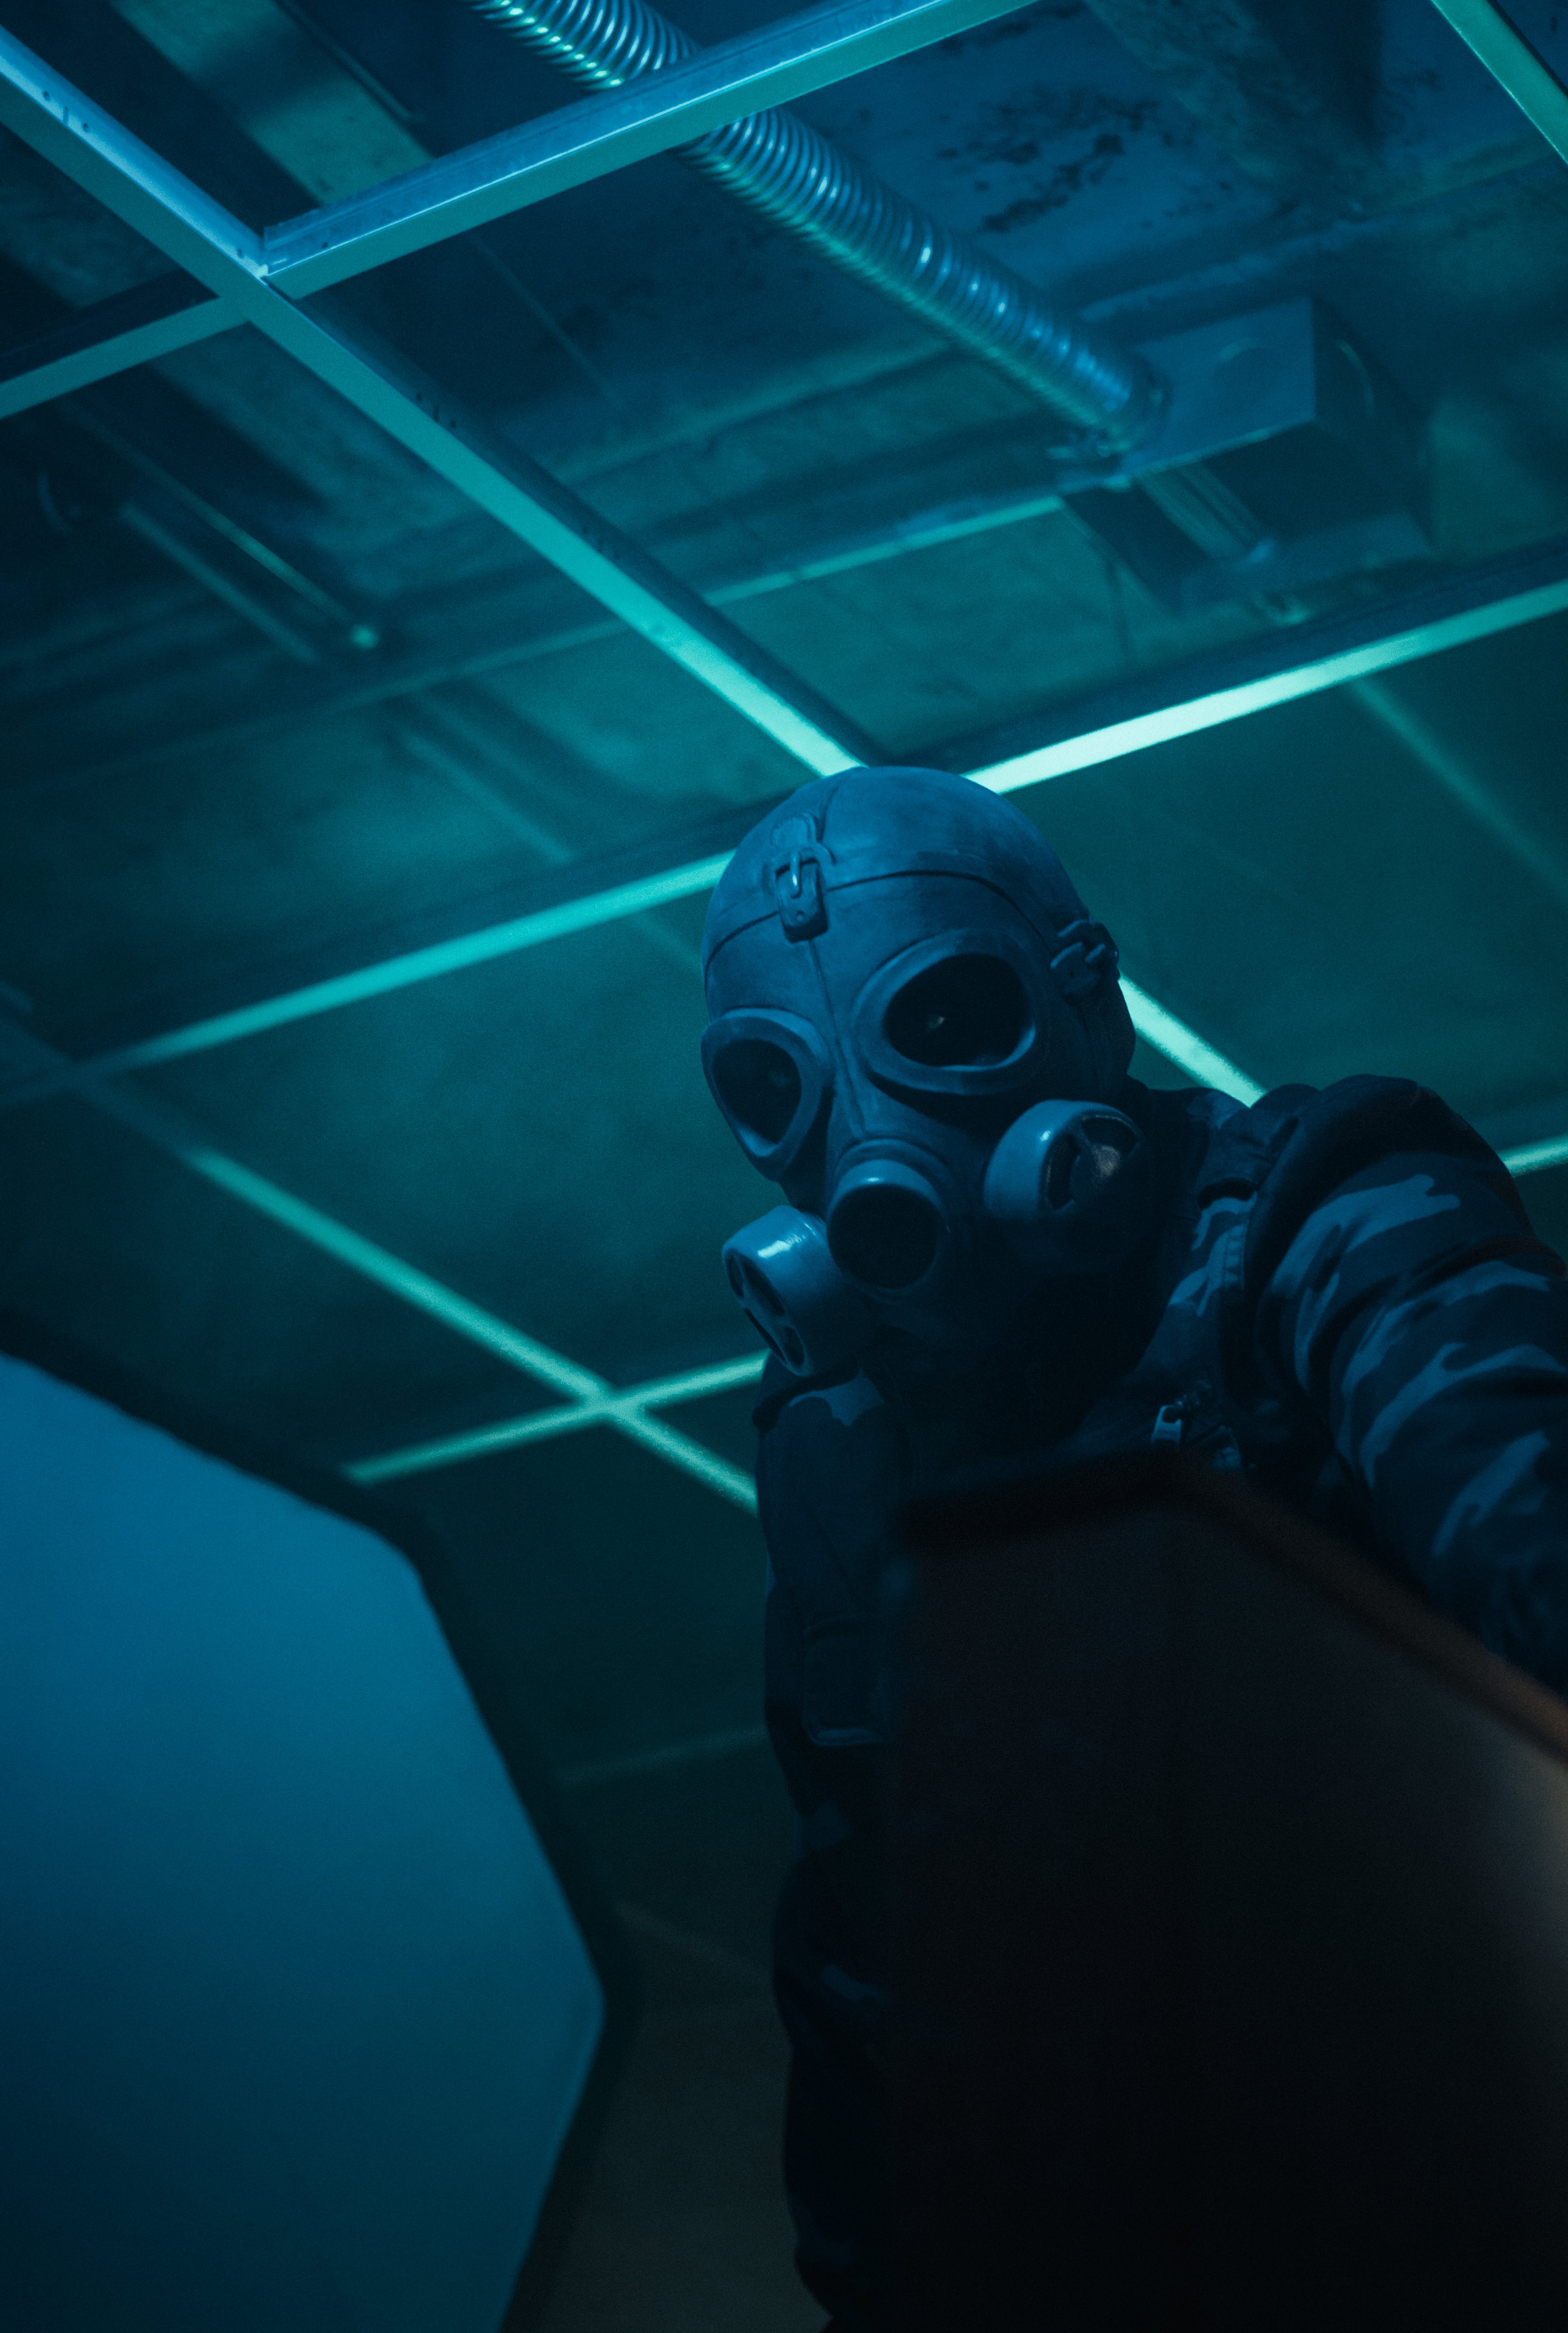 A person wearing a gas mask. | Source: Pexels